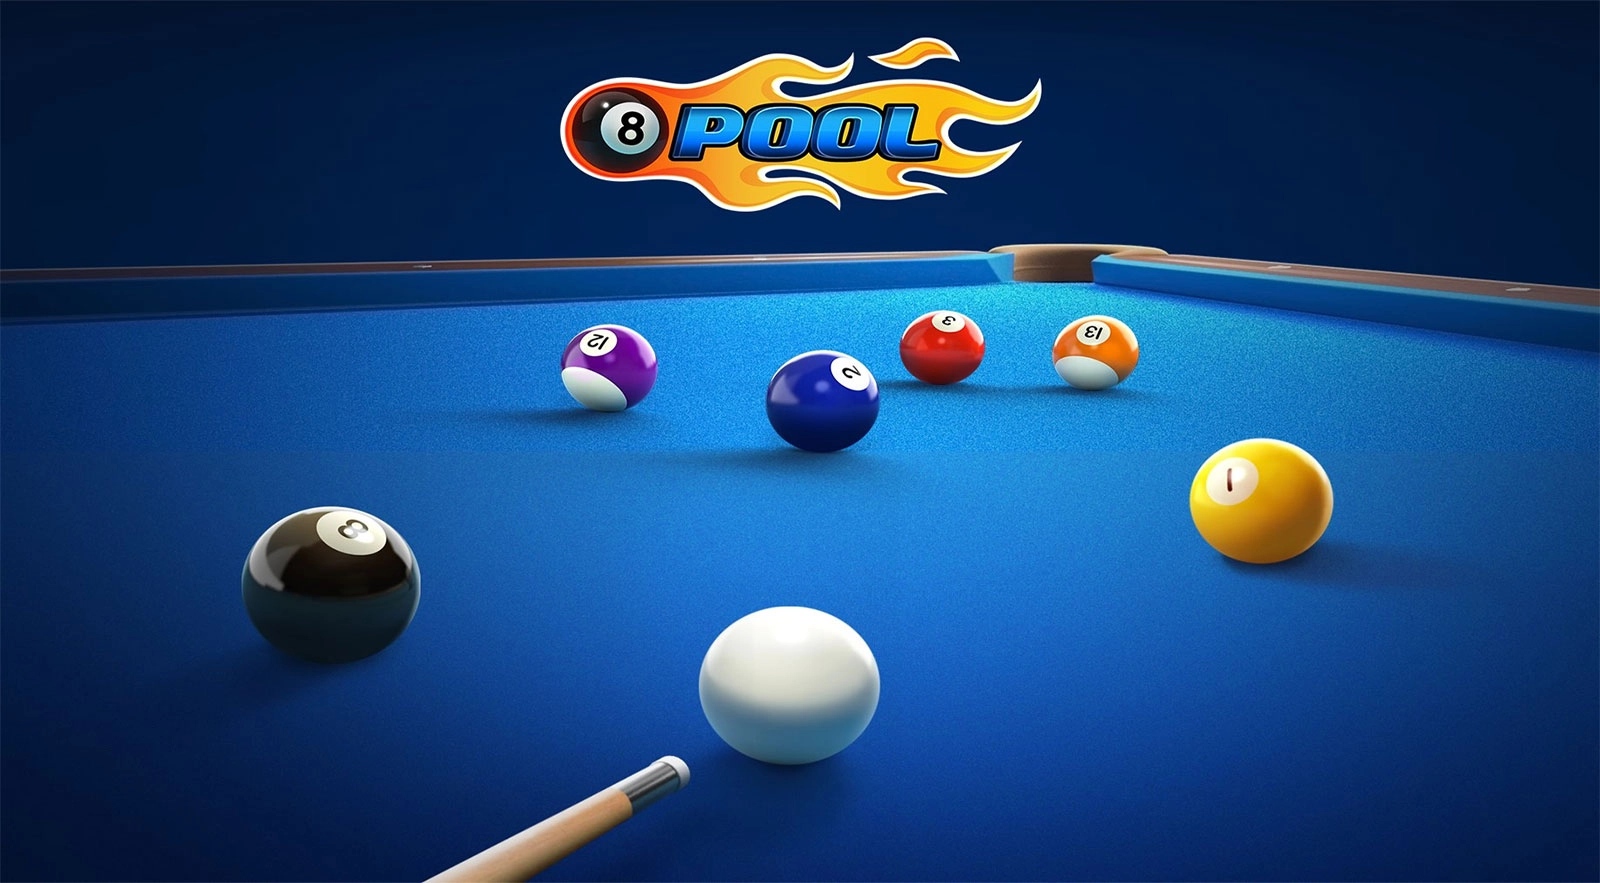 8 Ball Pool v5.6.7 Mod APK (Unlimited Coins and Cash)